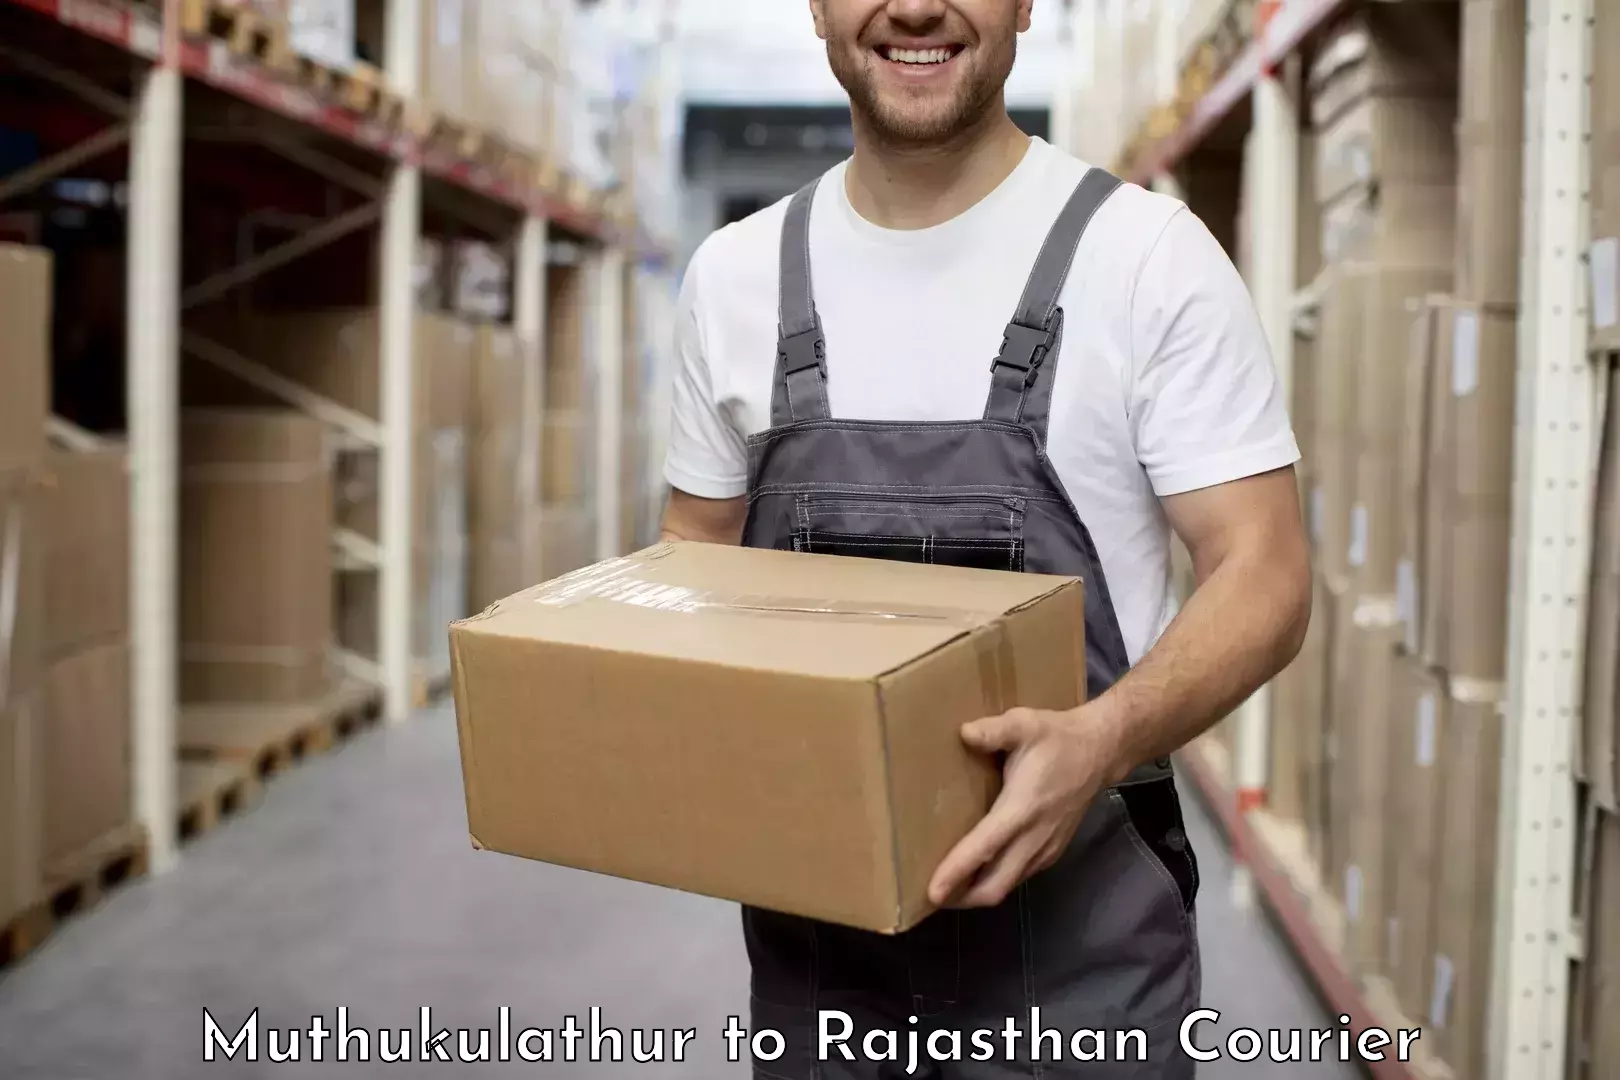 Customer-focused courier Muthukulathur to Kaman